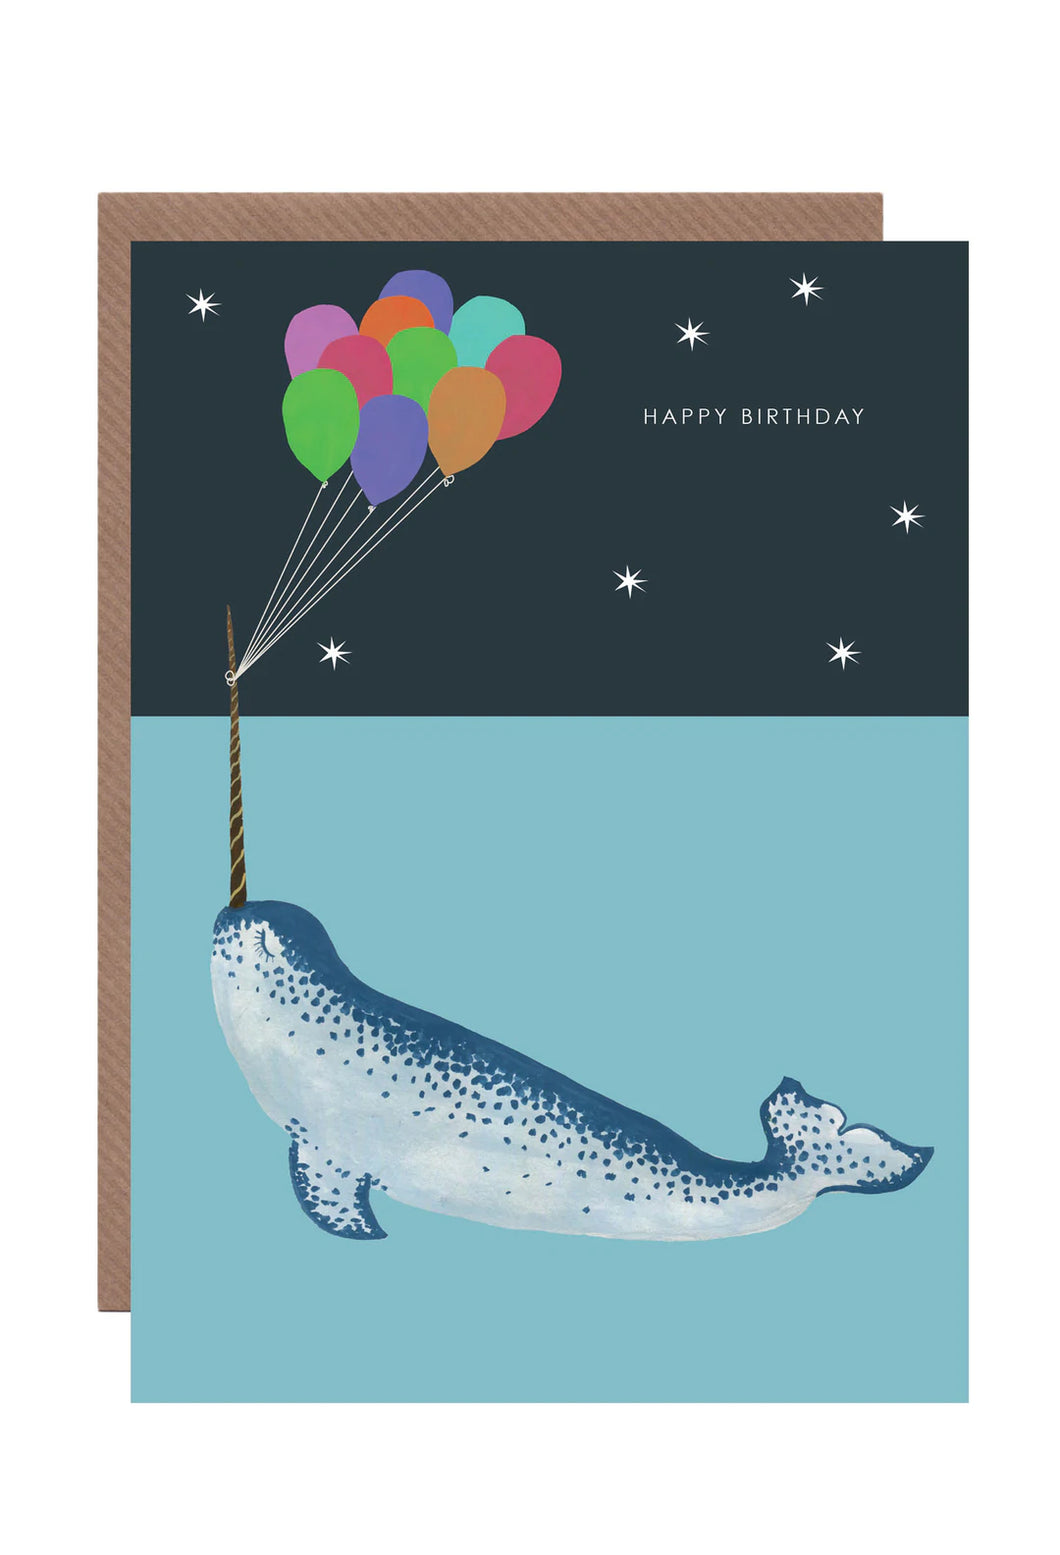 Narwhal Birthday Card by Hutch Cassidy